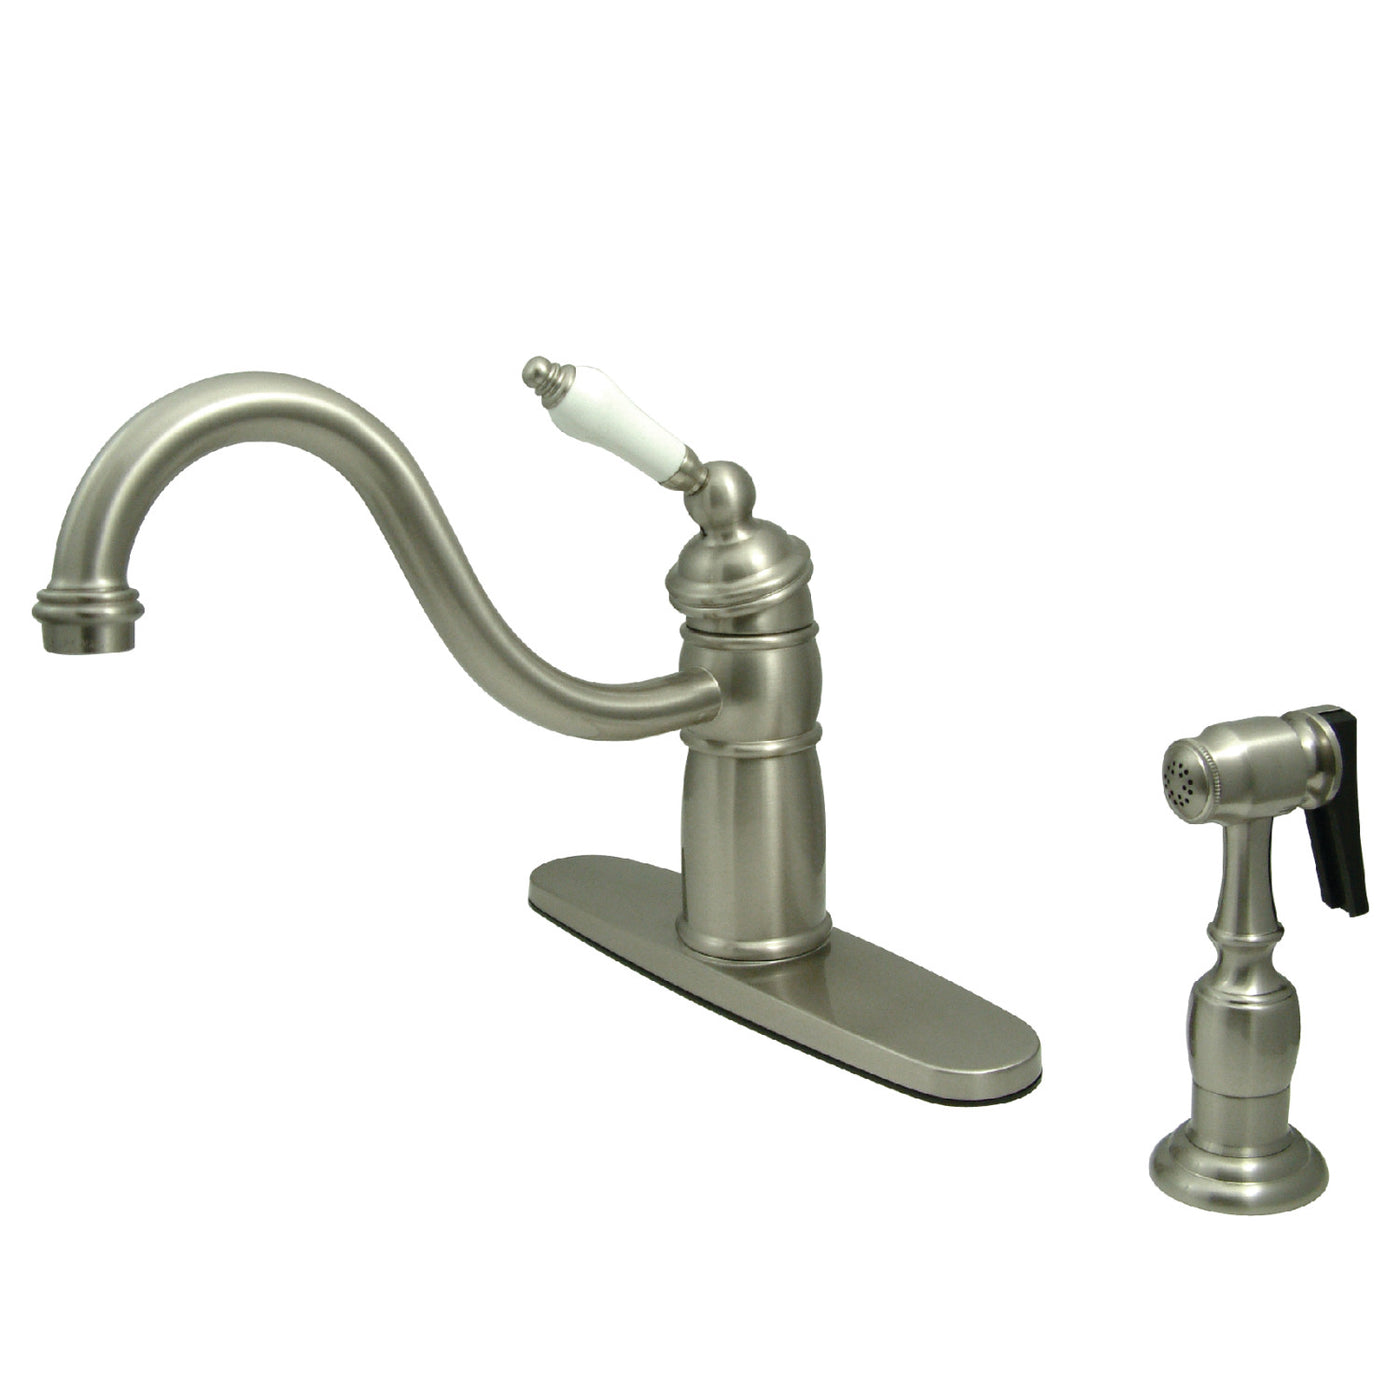 Elements of Design EB1578PLBS Single-Handle Kitchen Faucet with Brass Sprayer, Brushed Nickel